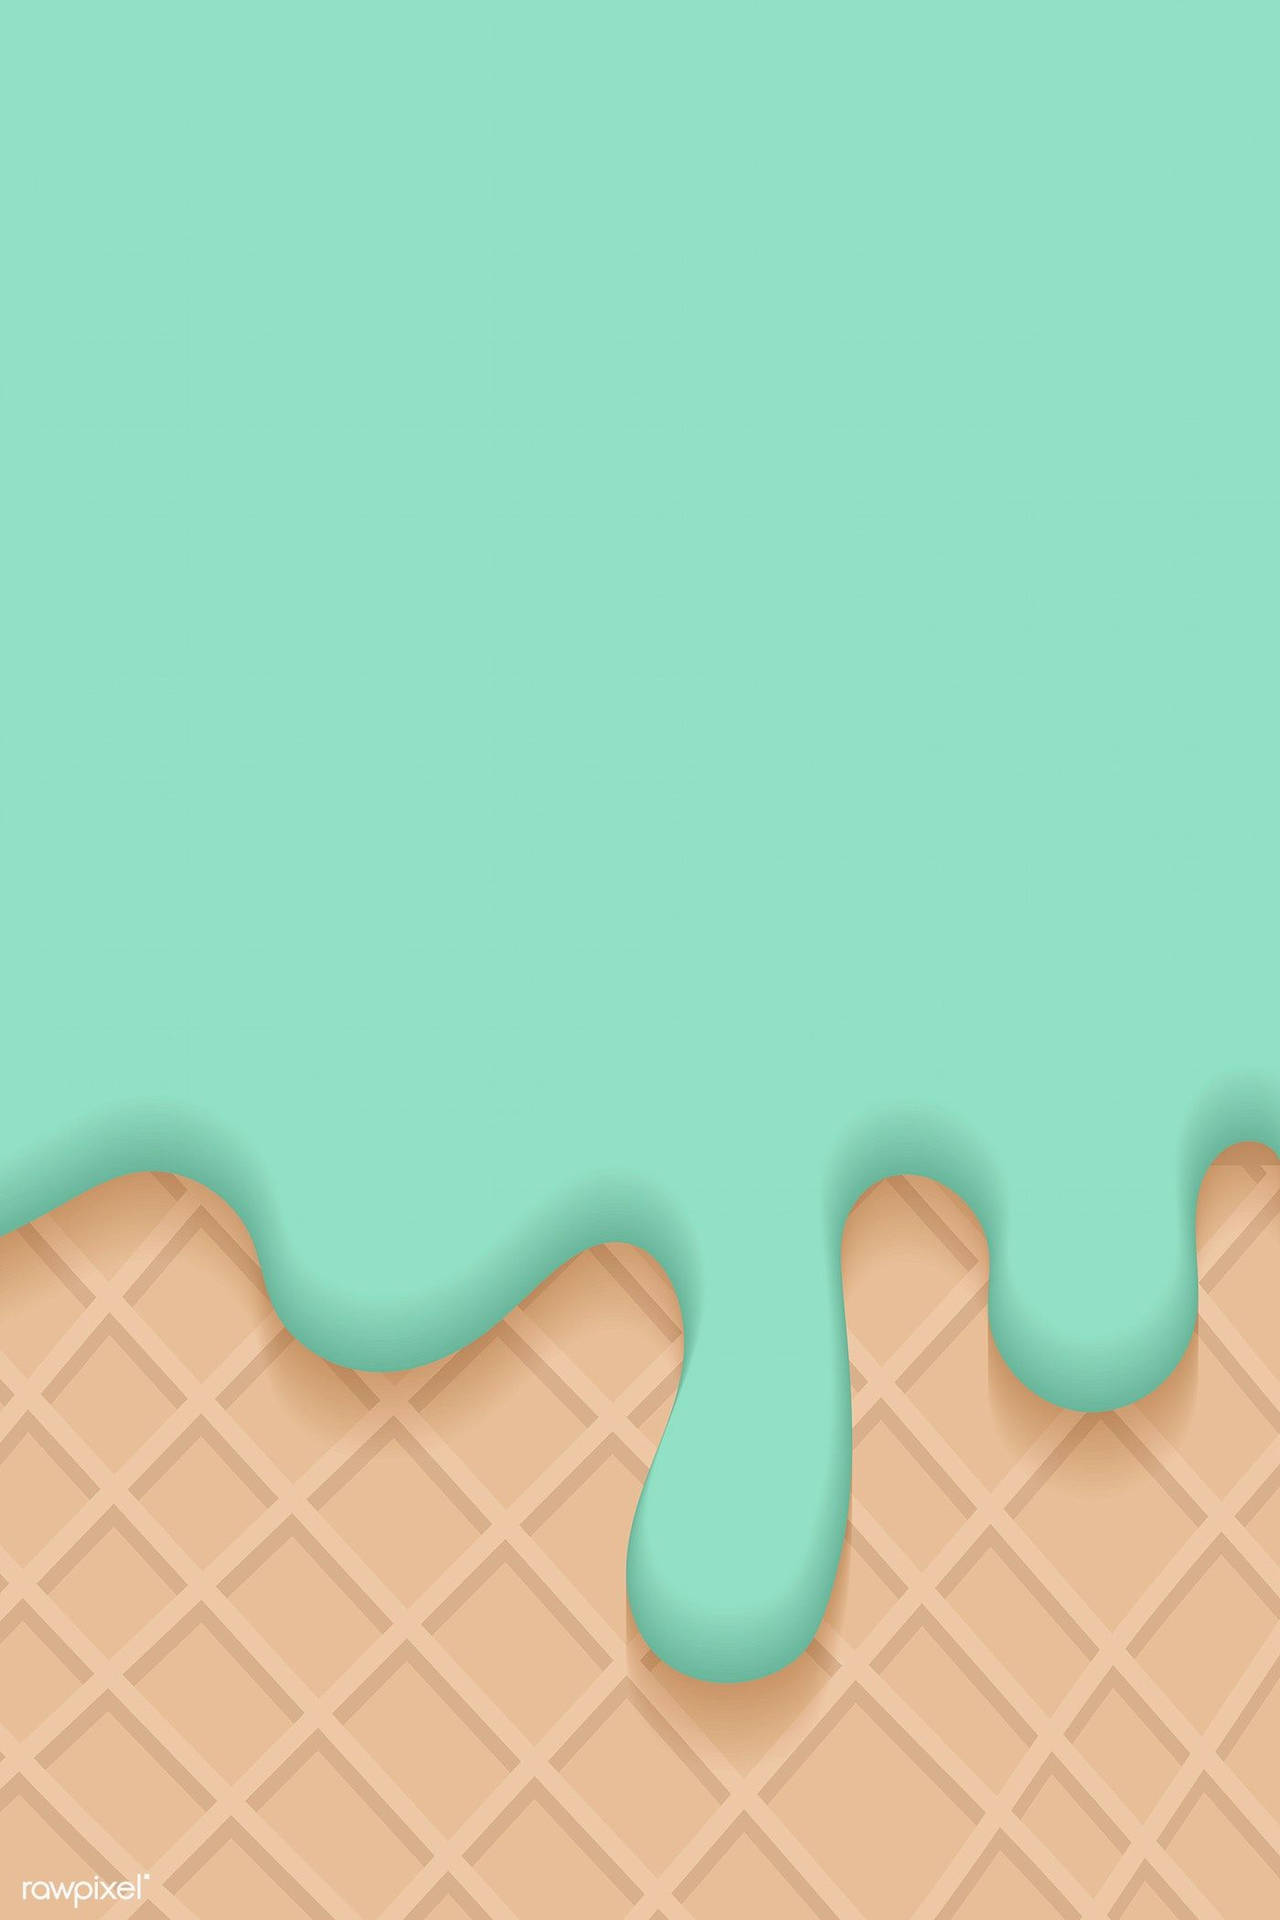 Waffle Texture With Melting Mint Green Iphone Wallpaper